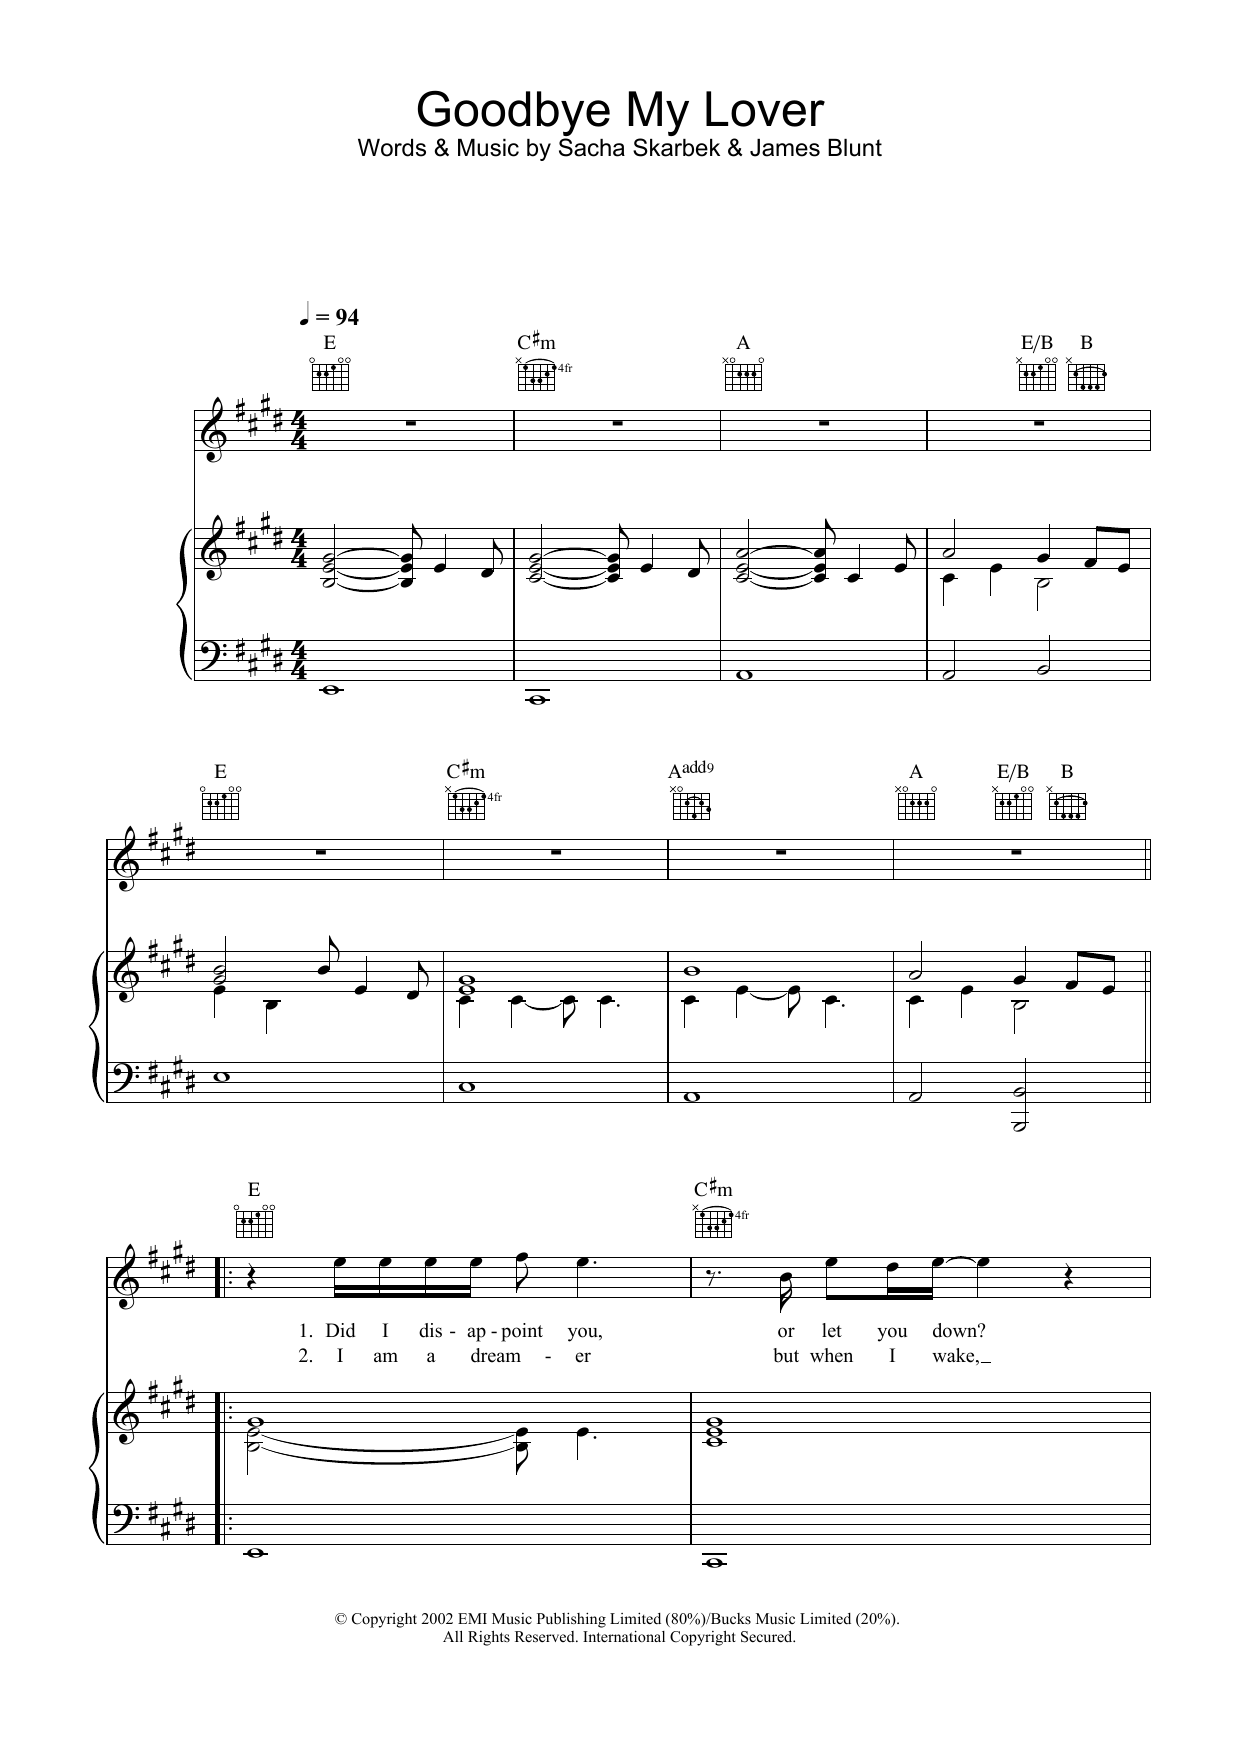 James Blunt Goodbye My Lover sheet music notes and chords. Download Printable PDF.